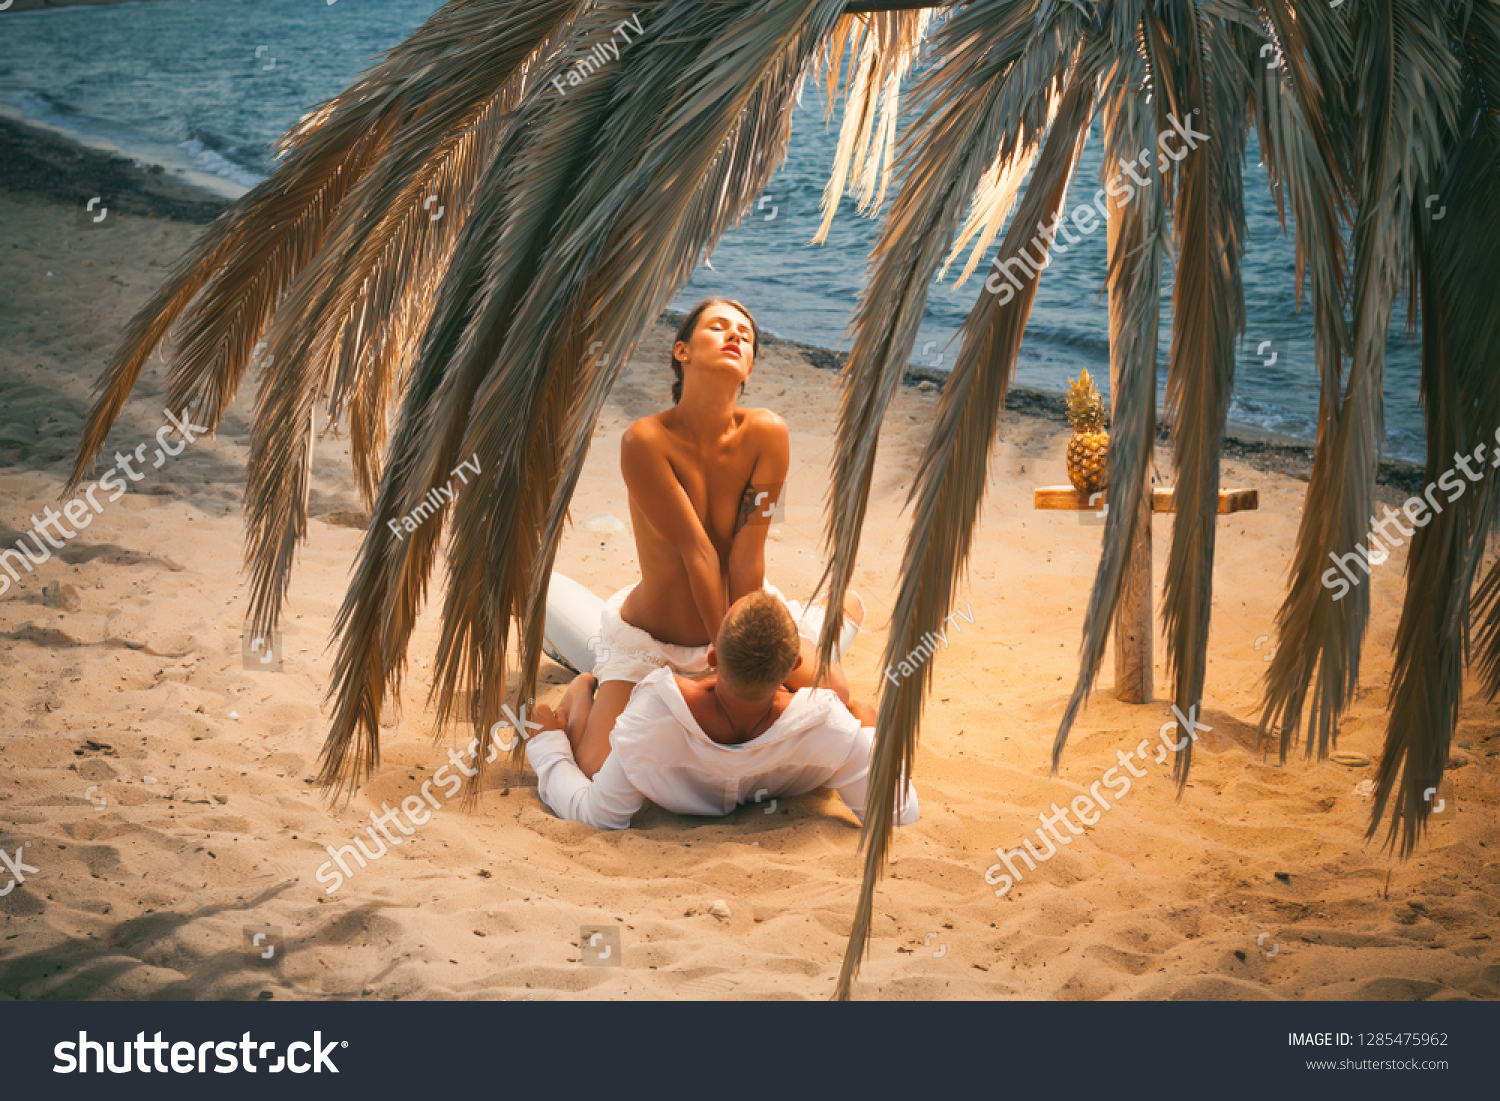 Sensual. Attractive couple having sex on the beach. Sex on beach concept. Couple full of desire have sex on sand of seashore. Sensual lovers making love at seashore, sea on background. Vacation.  #1285475962